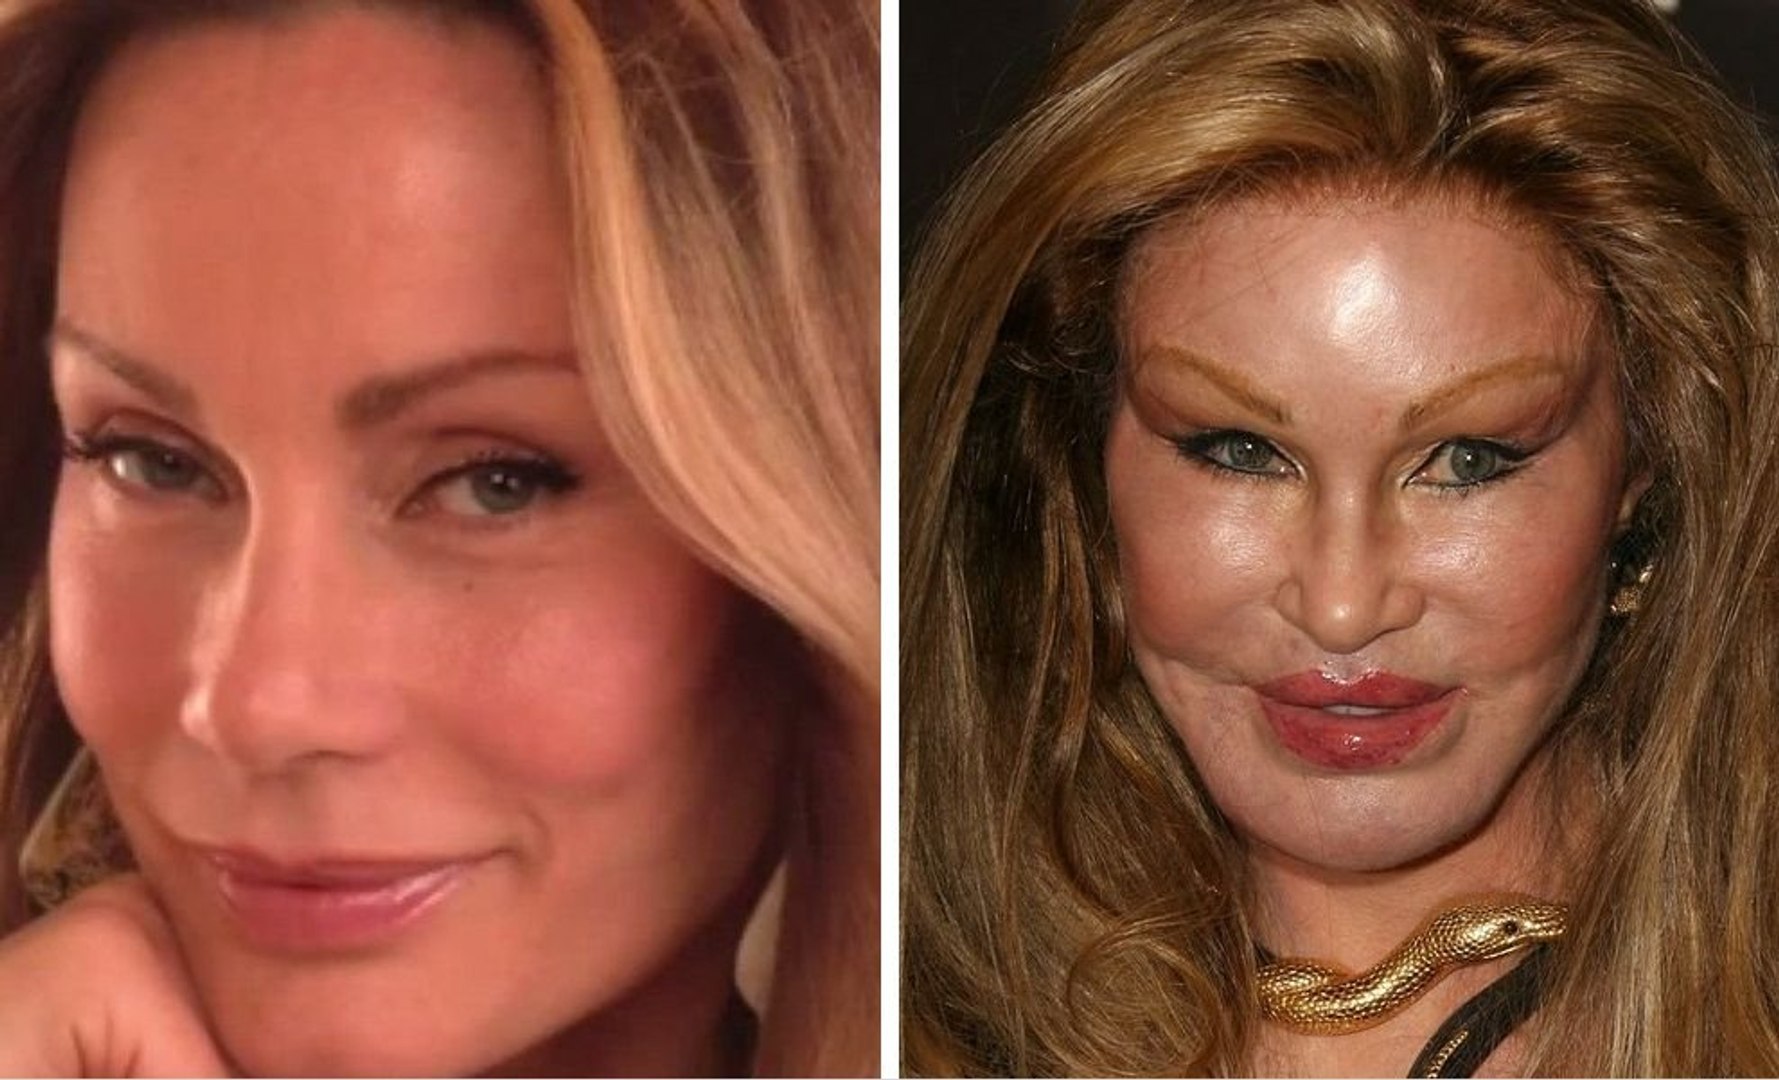 15 Celebrity Plastic Surgery Disasters -   Celebrity plastic surgery,  Bad celebrity plastic surgery, Celebrity surgery